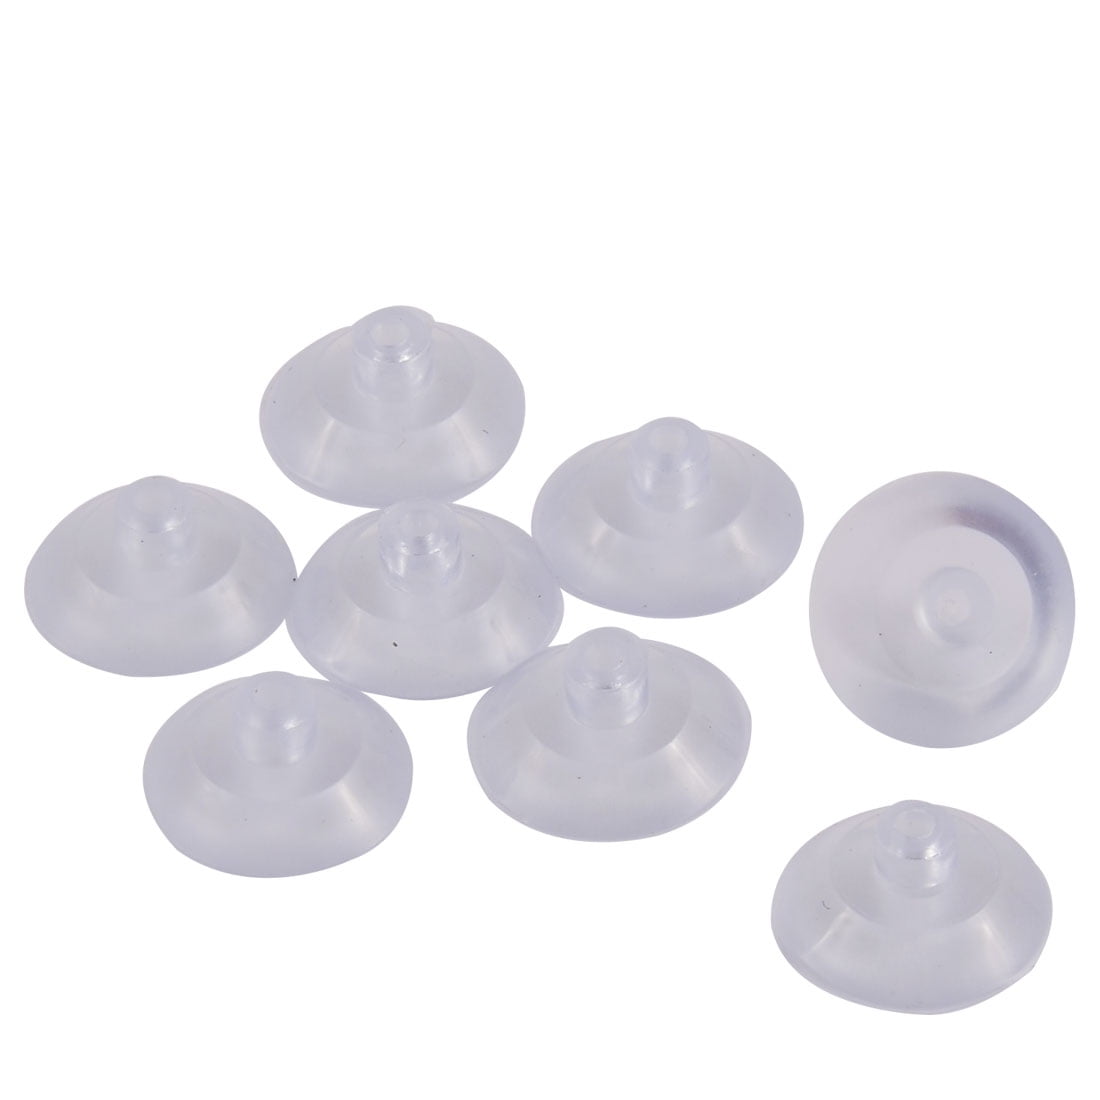 5 Pcs Clear Strong Suction Cups Window Glass Plastic Rubber Suction Suckers Pads 